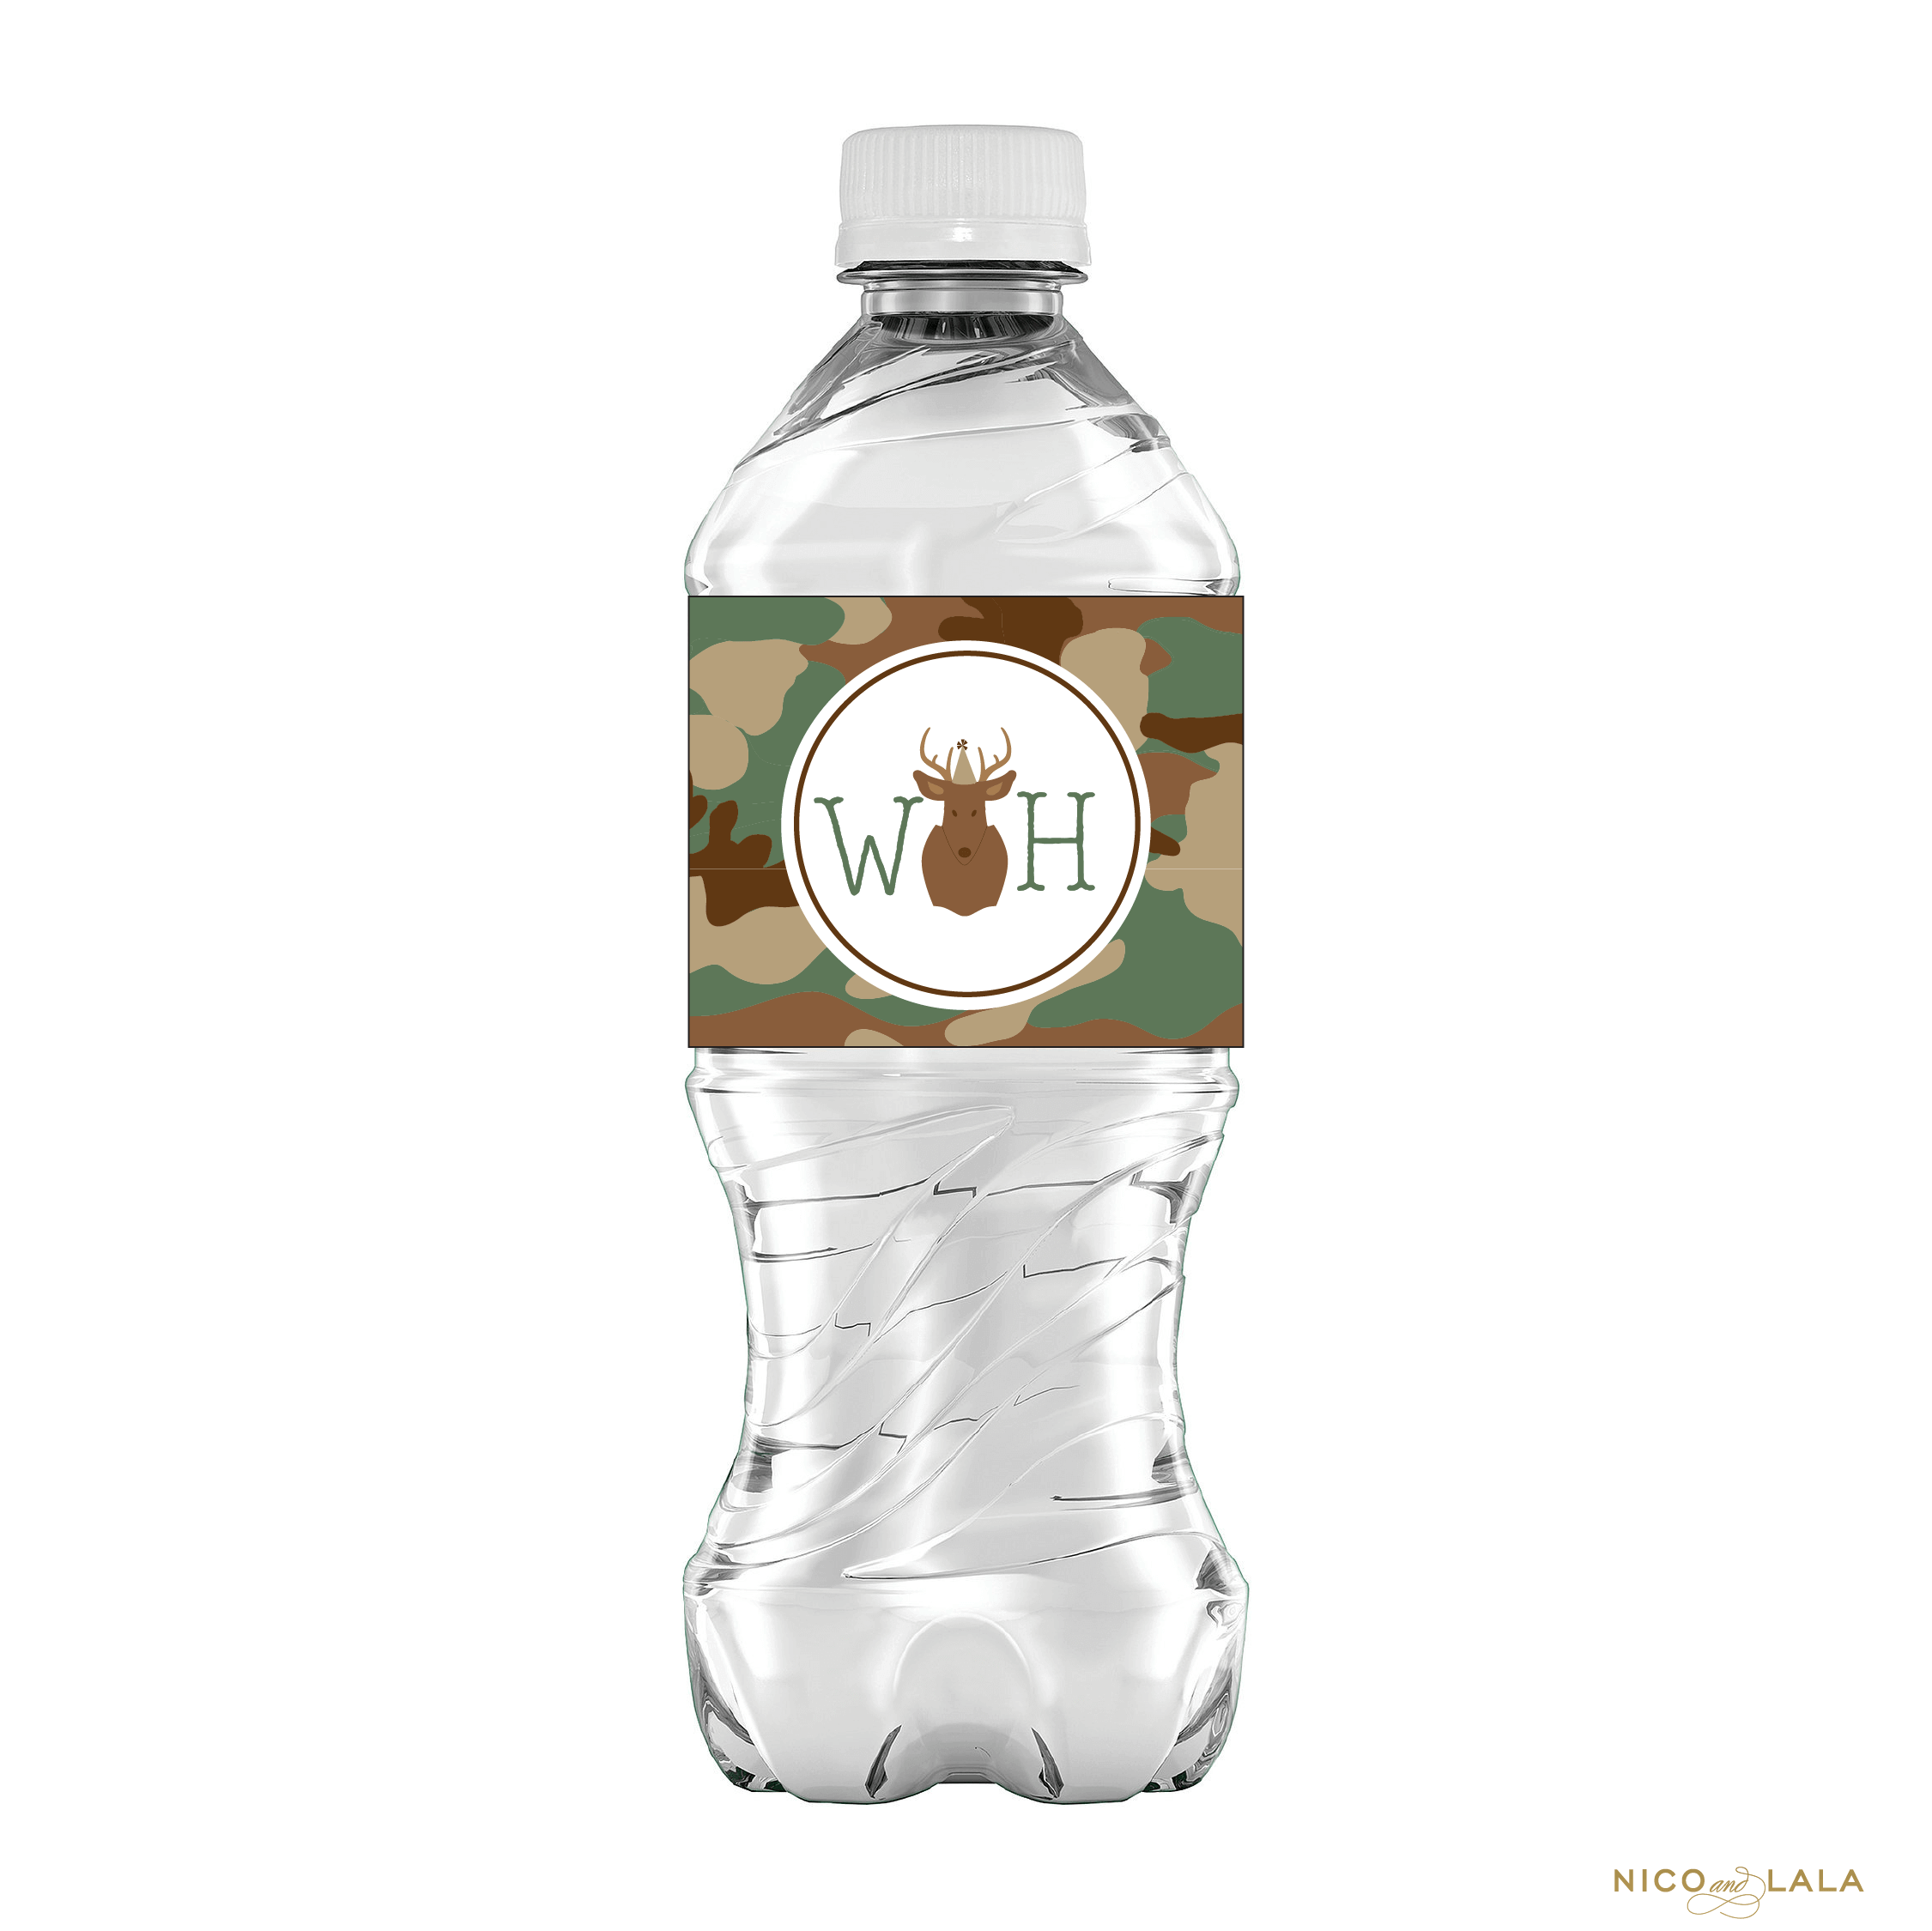 Camouflage water bottle label